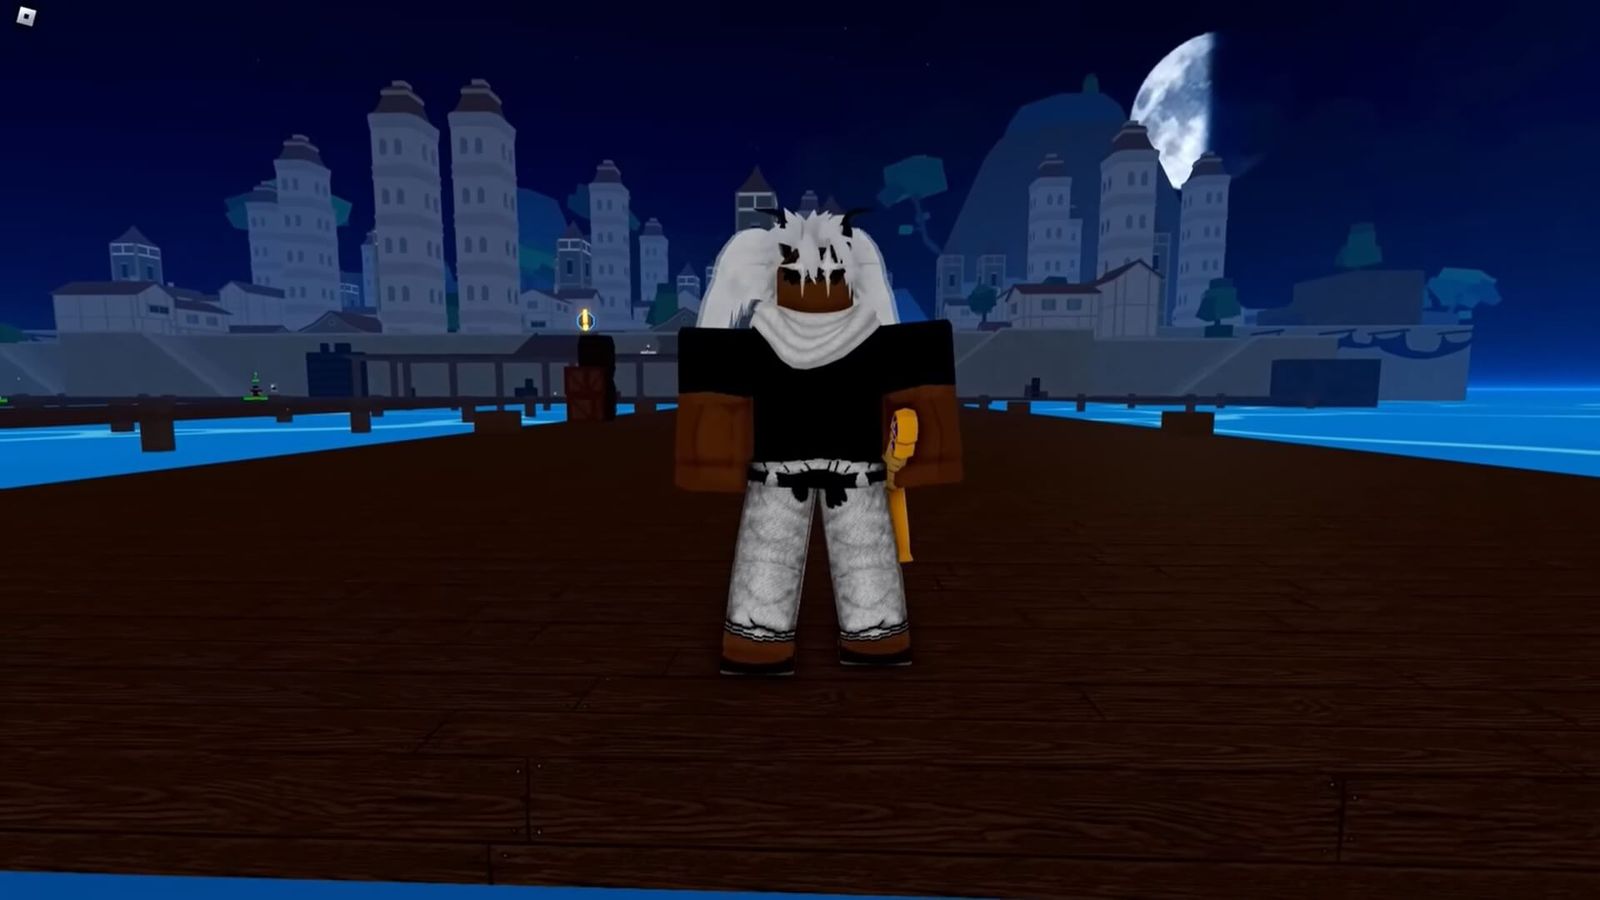 Blox Fruits gameplay image featuring a character with a sword